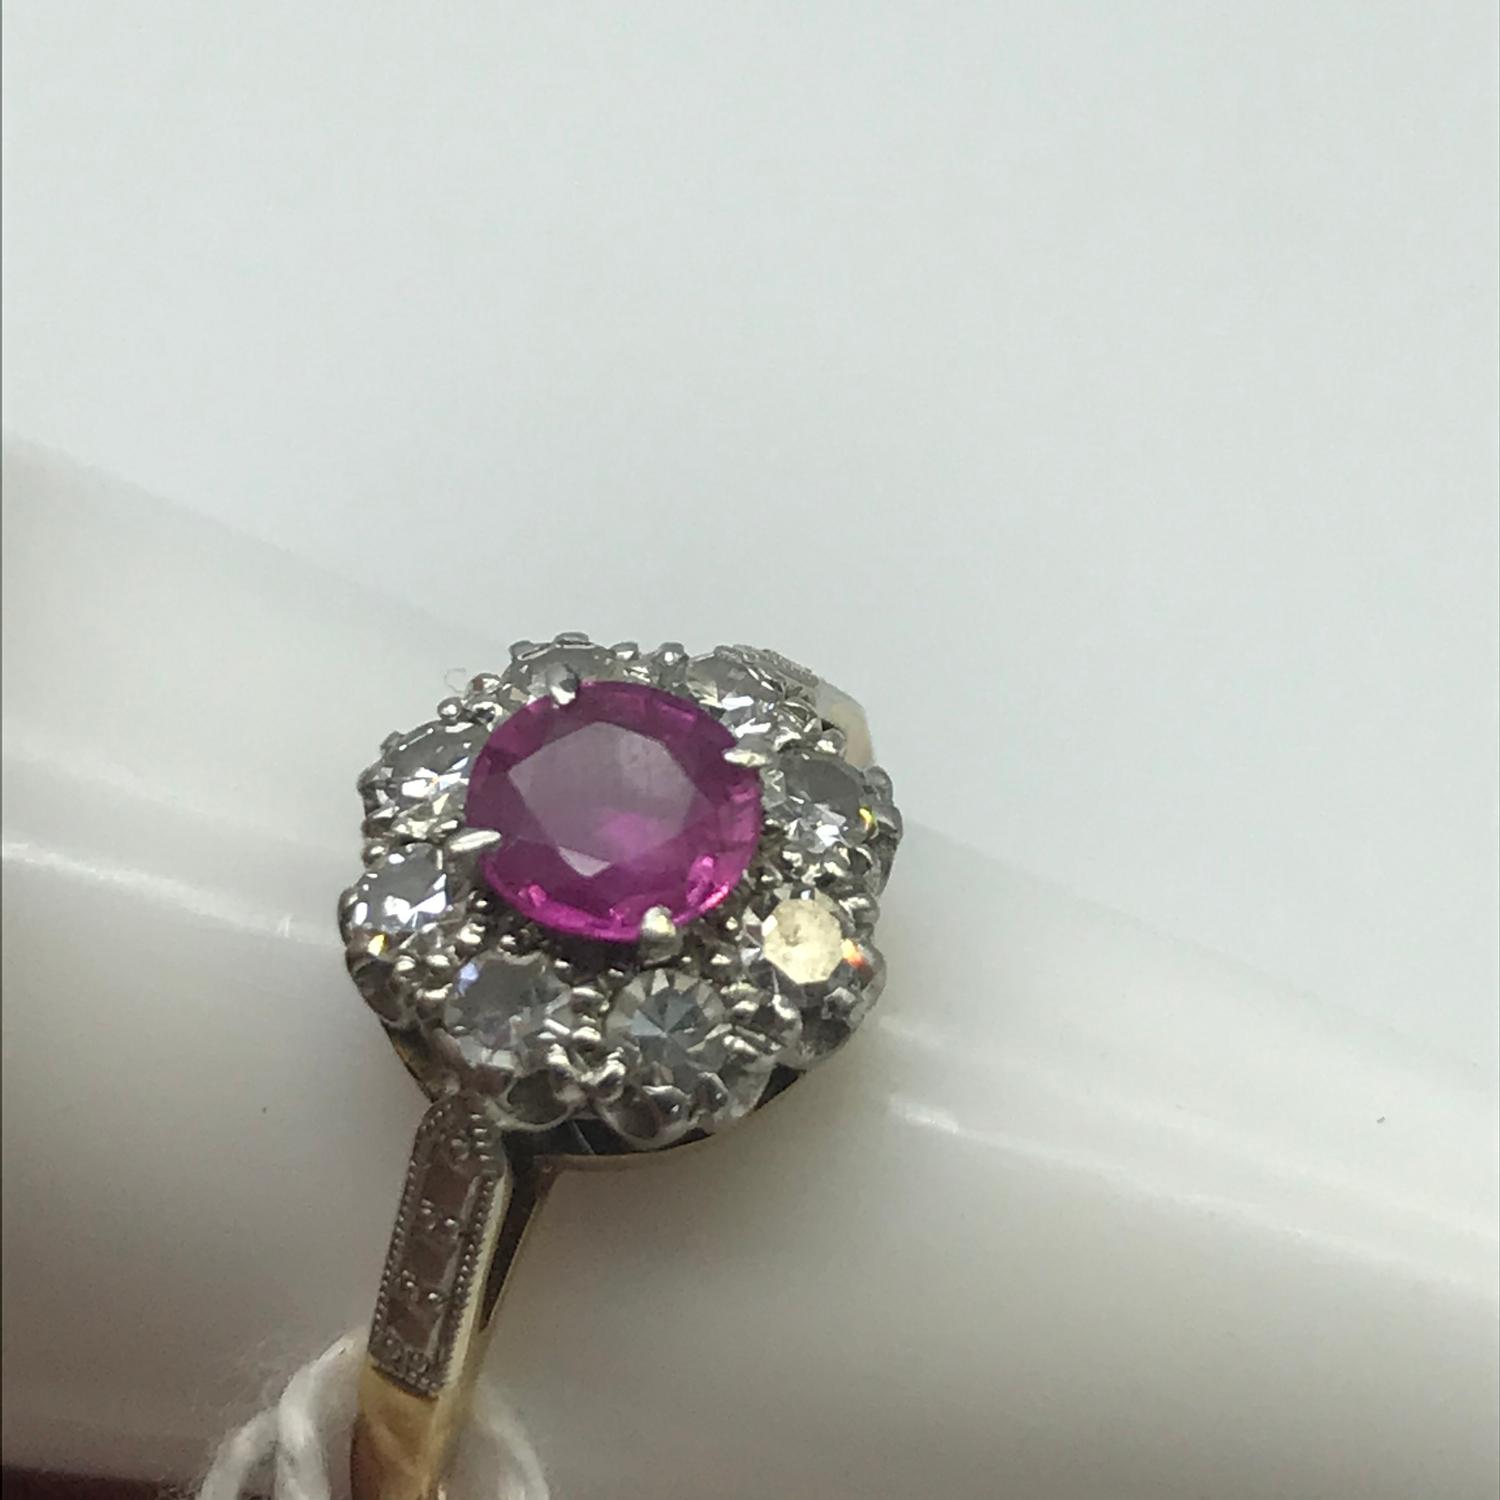 An 18ct gold and platinum ladies ring set with 8 diamonds and a large single ruby stone. Weighs 2. - Image 3 of 4